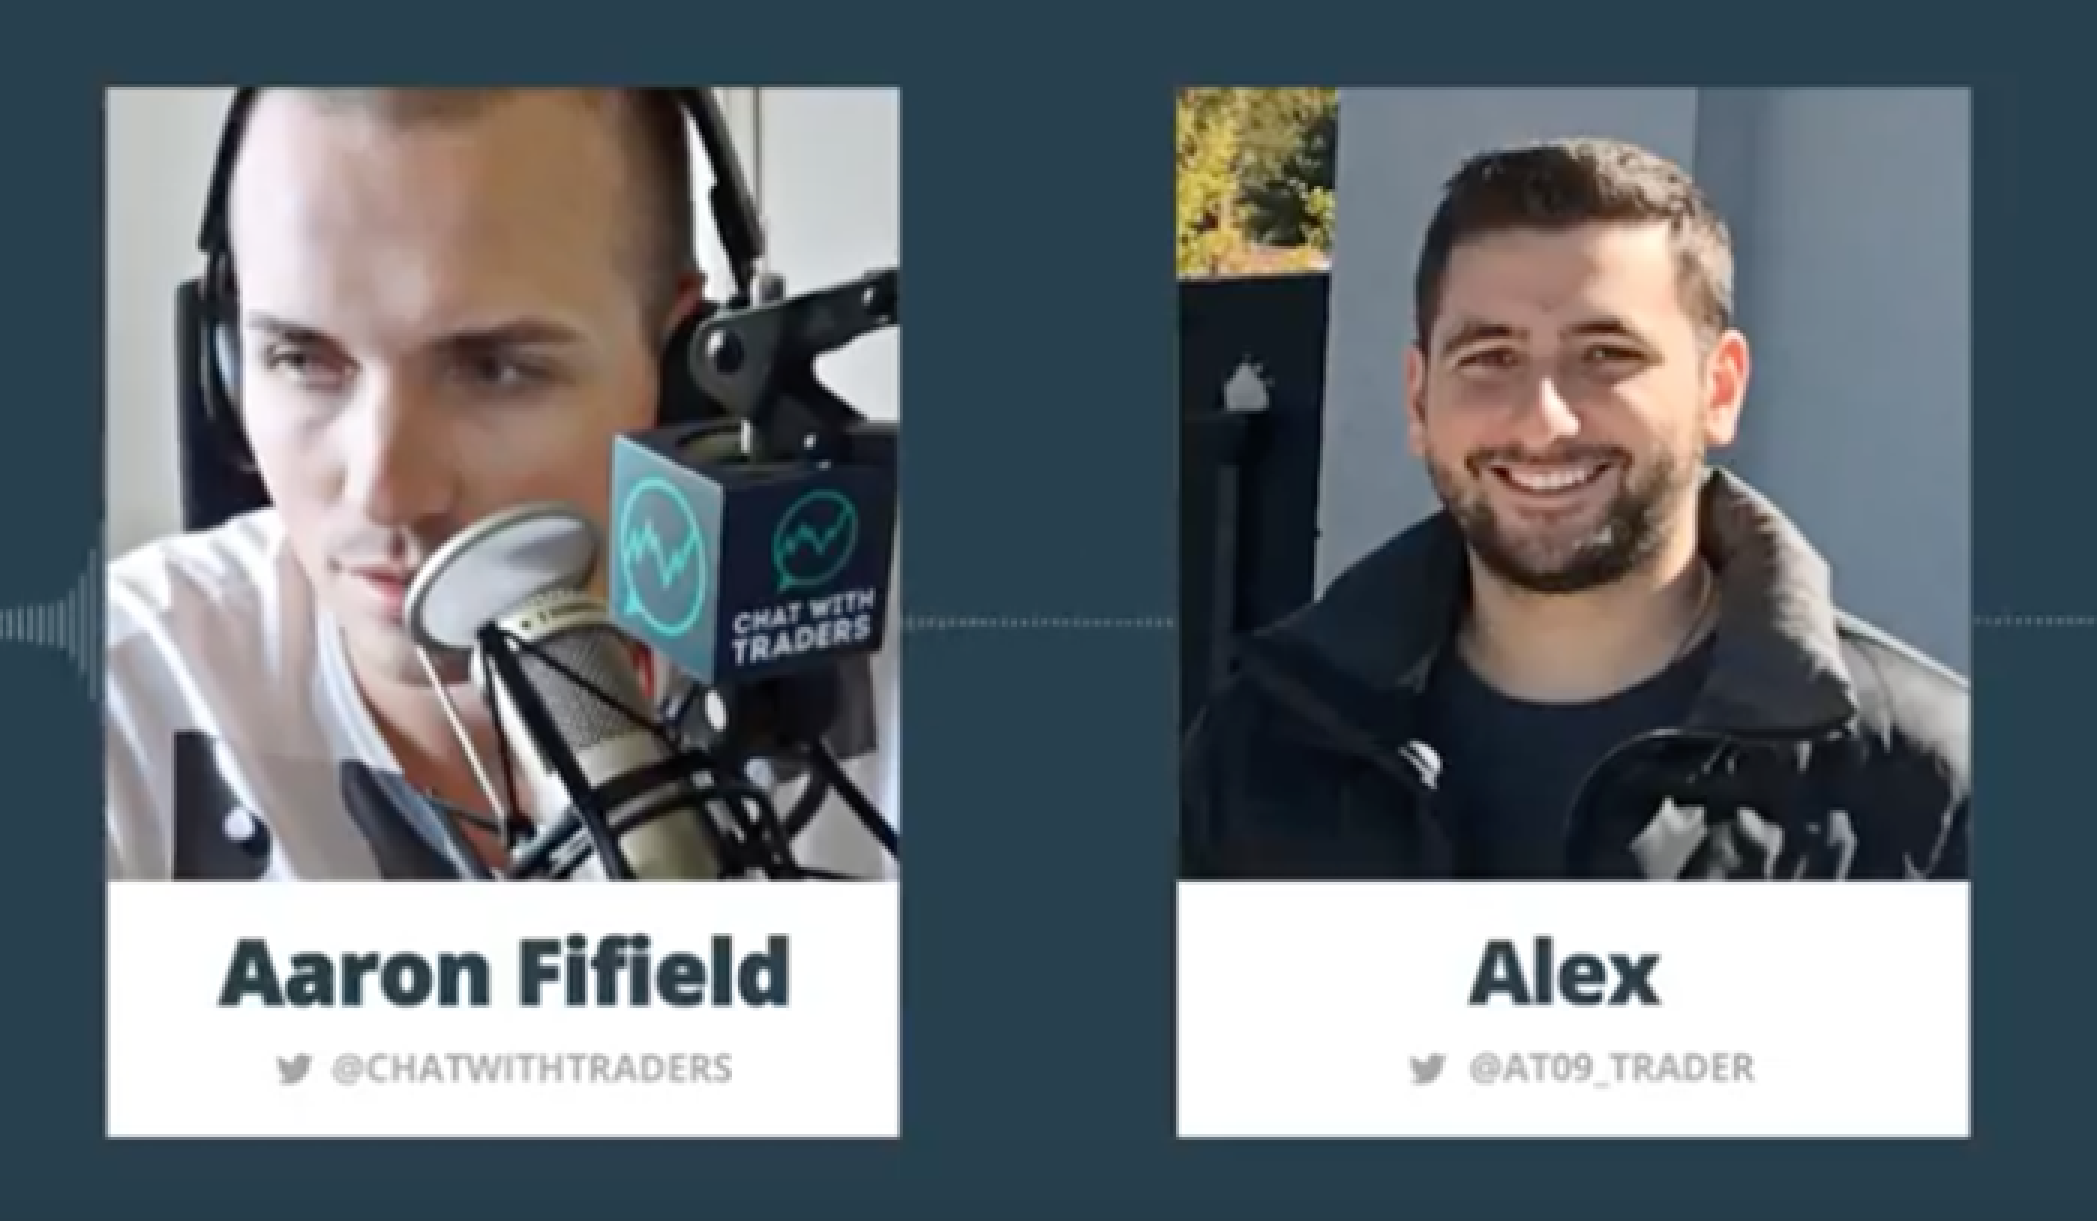 alex temiz on chat with traders with aaron fifield